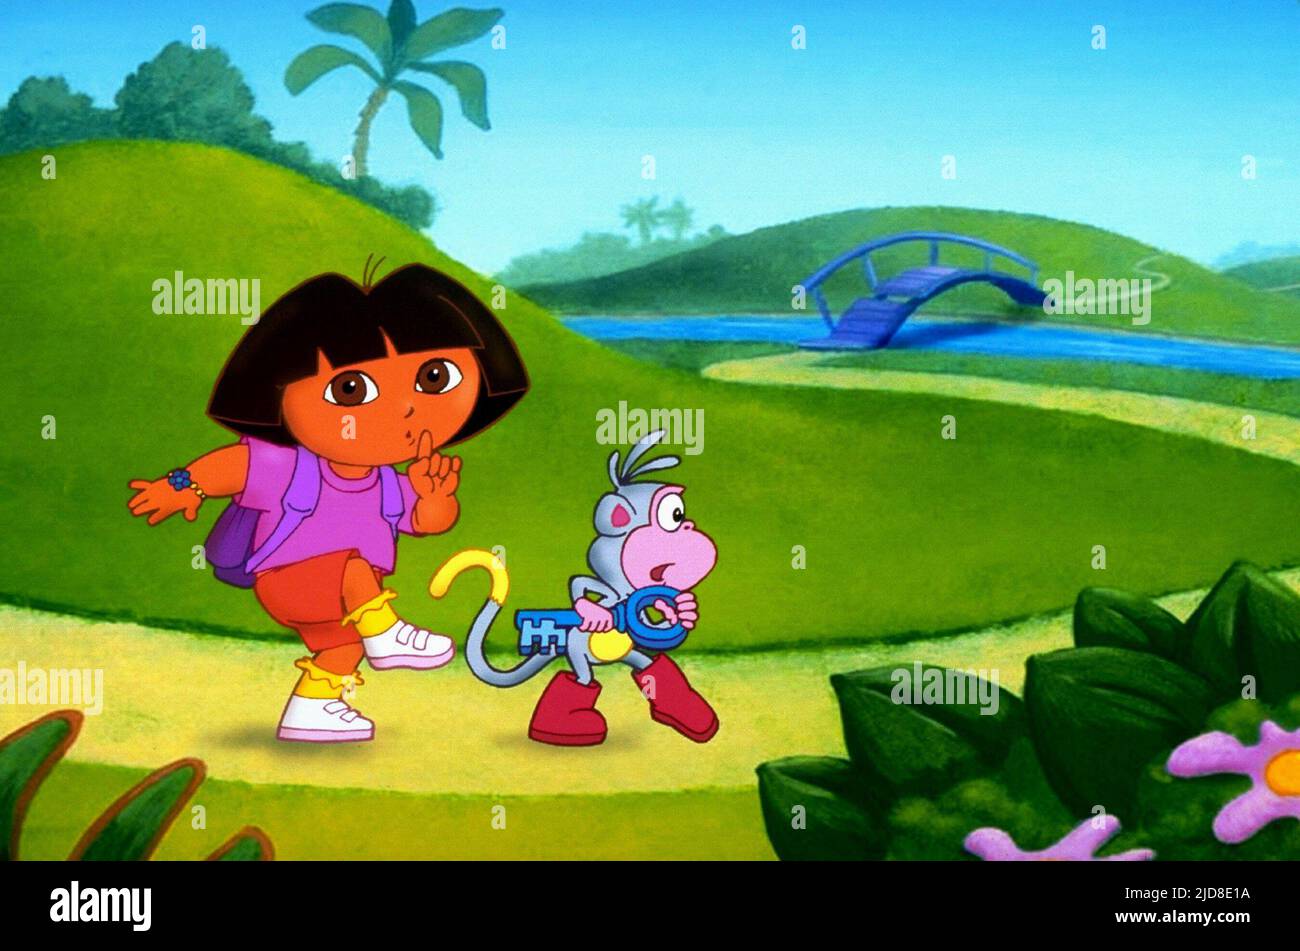 Unbelievable Collection: Over 999+ Dora Cartoon Images in Full 4K